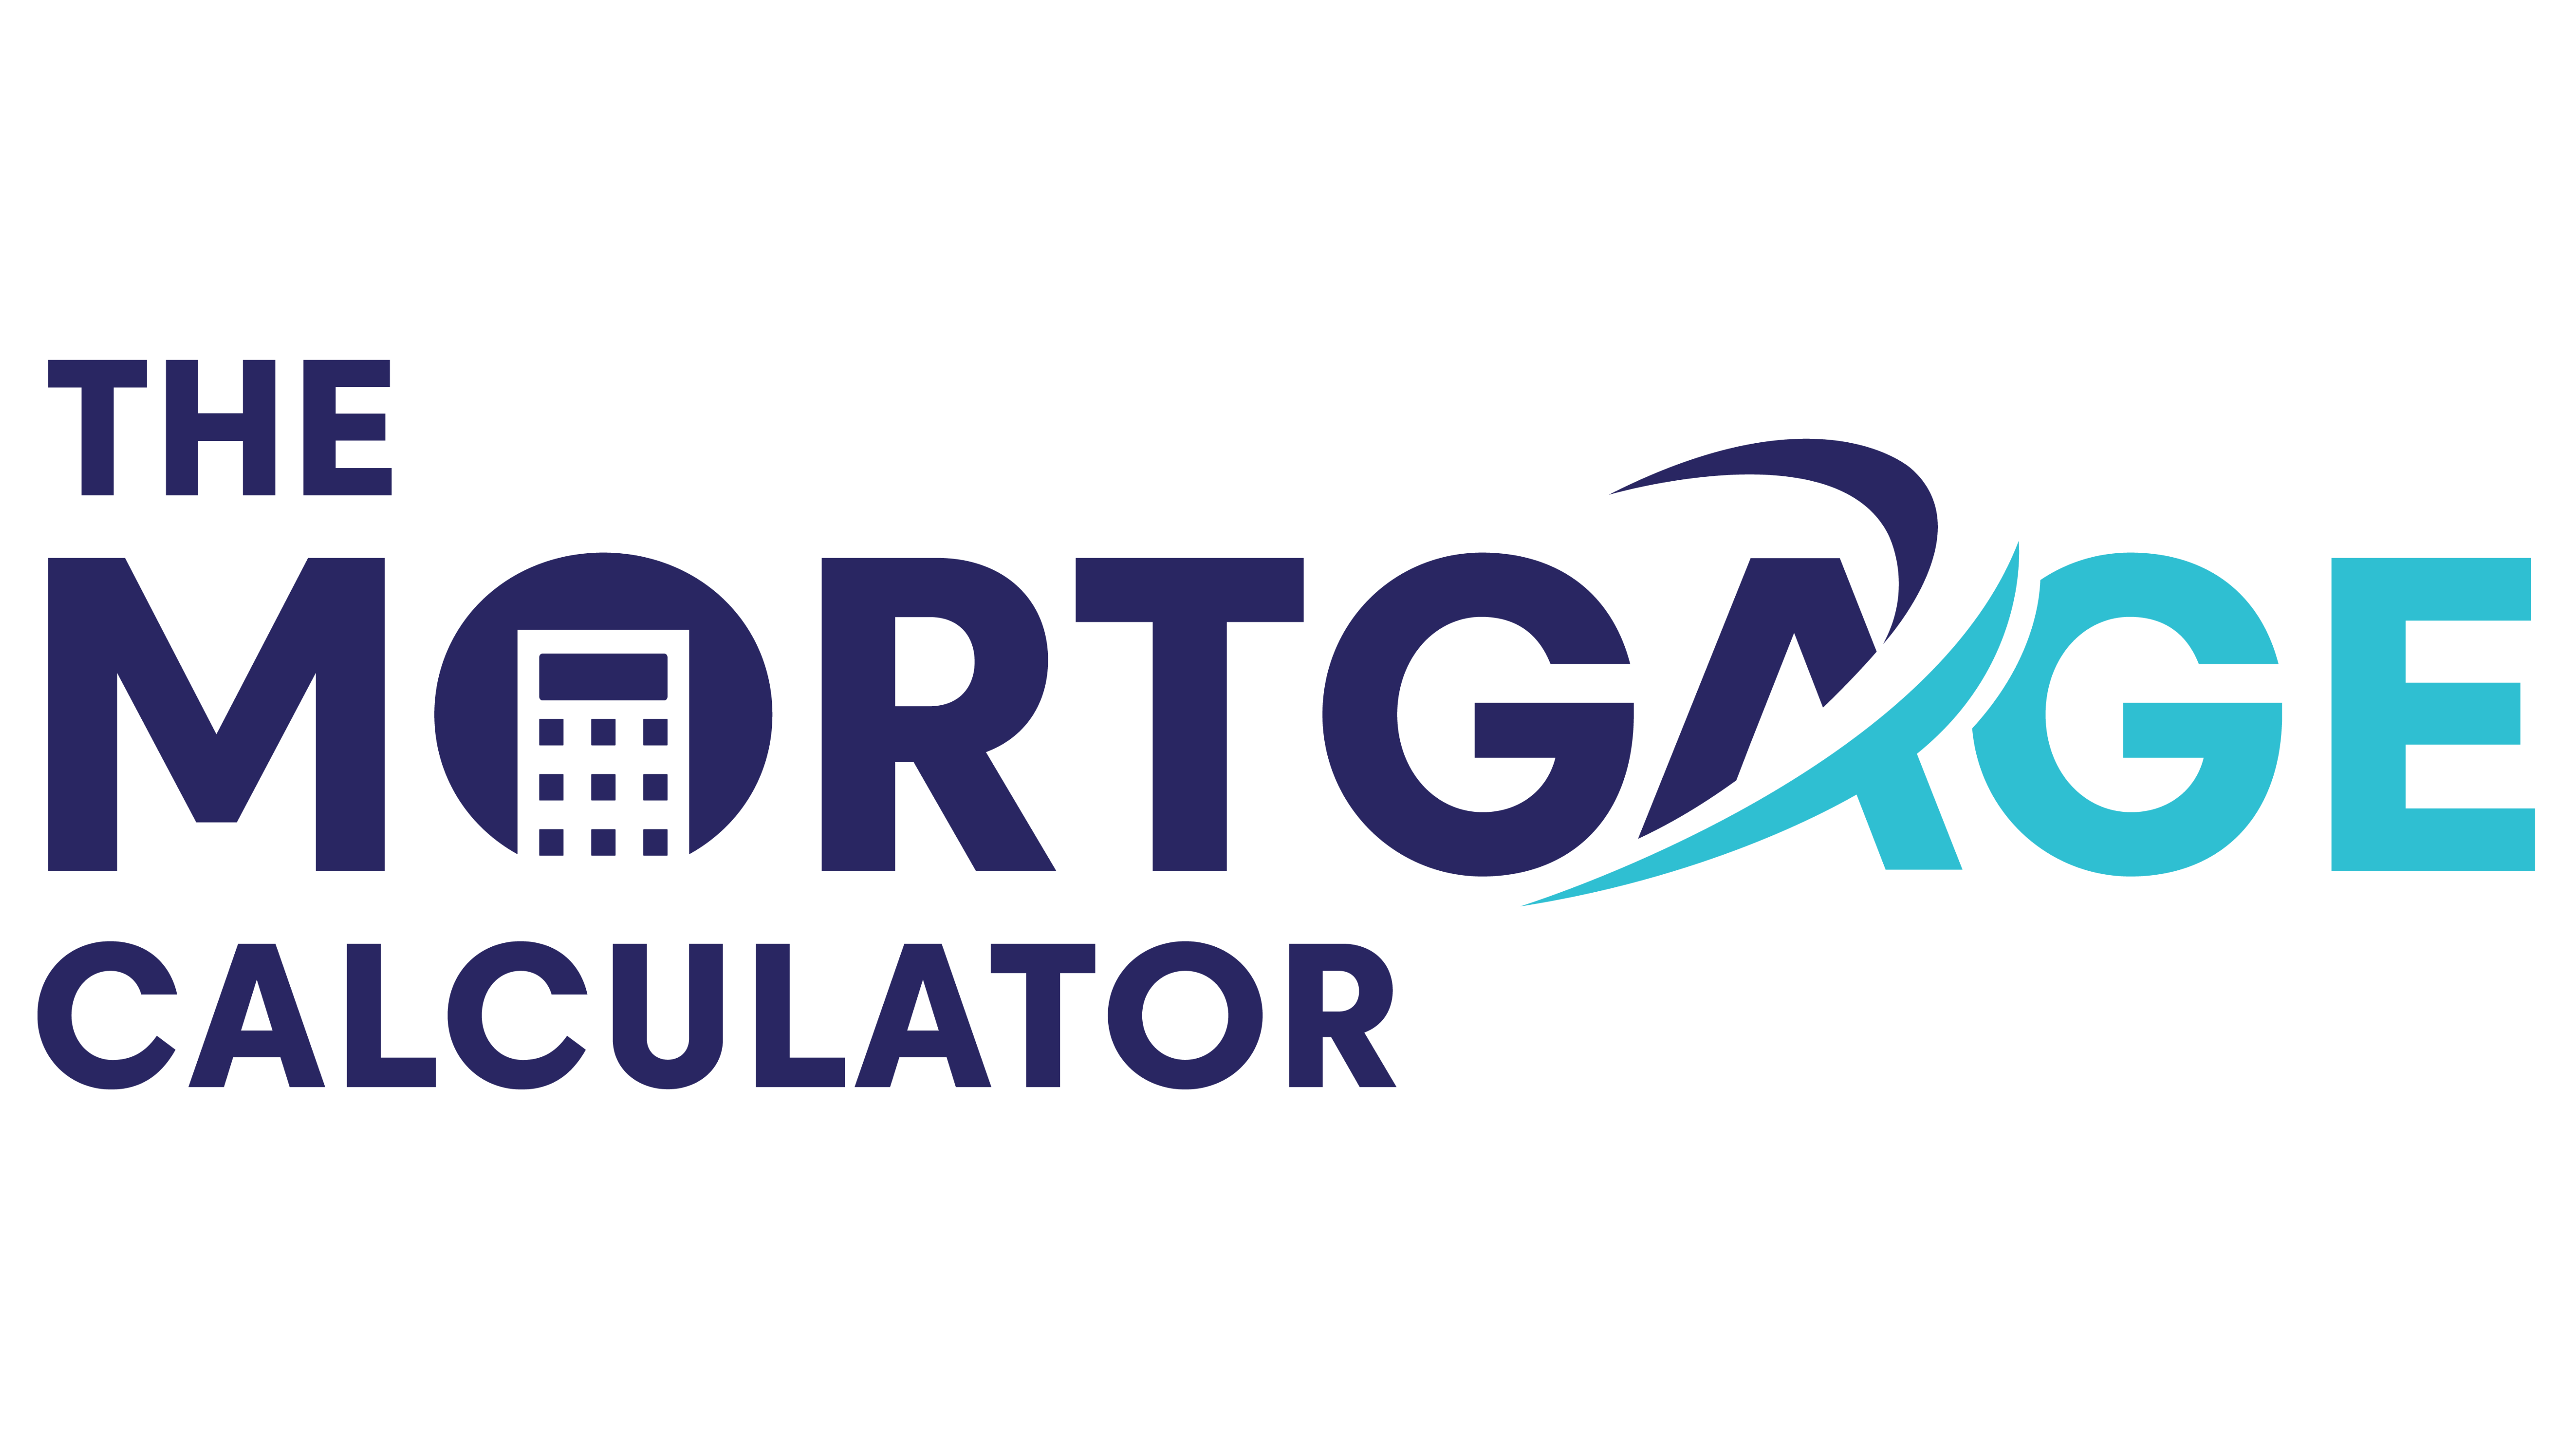 The Mortgage Calculator Launches Self Pricing Engine so Investors Can Price DSCR Loans